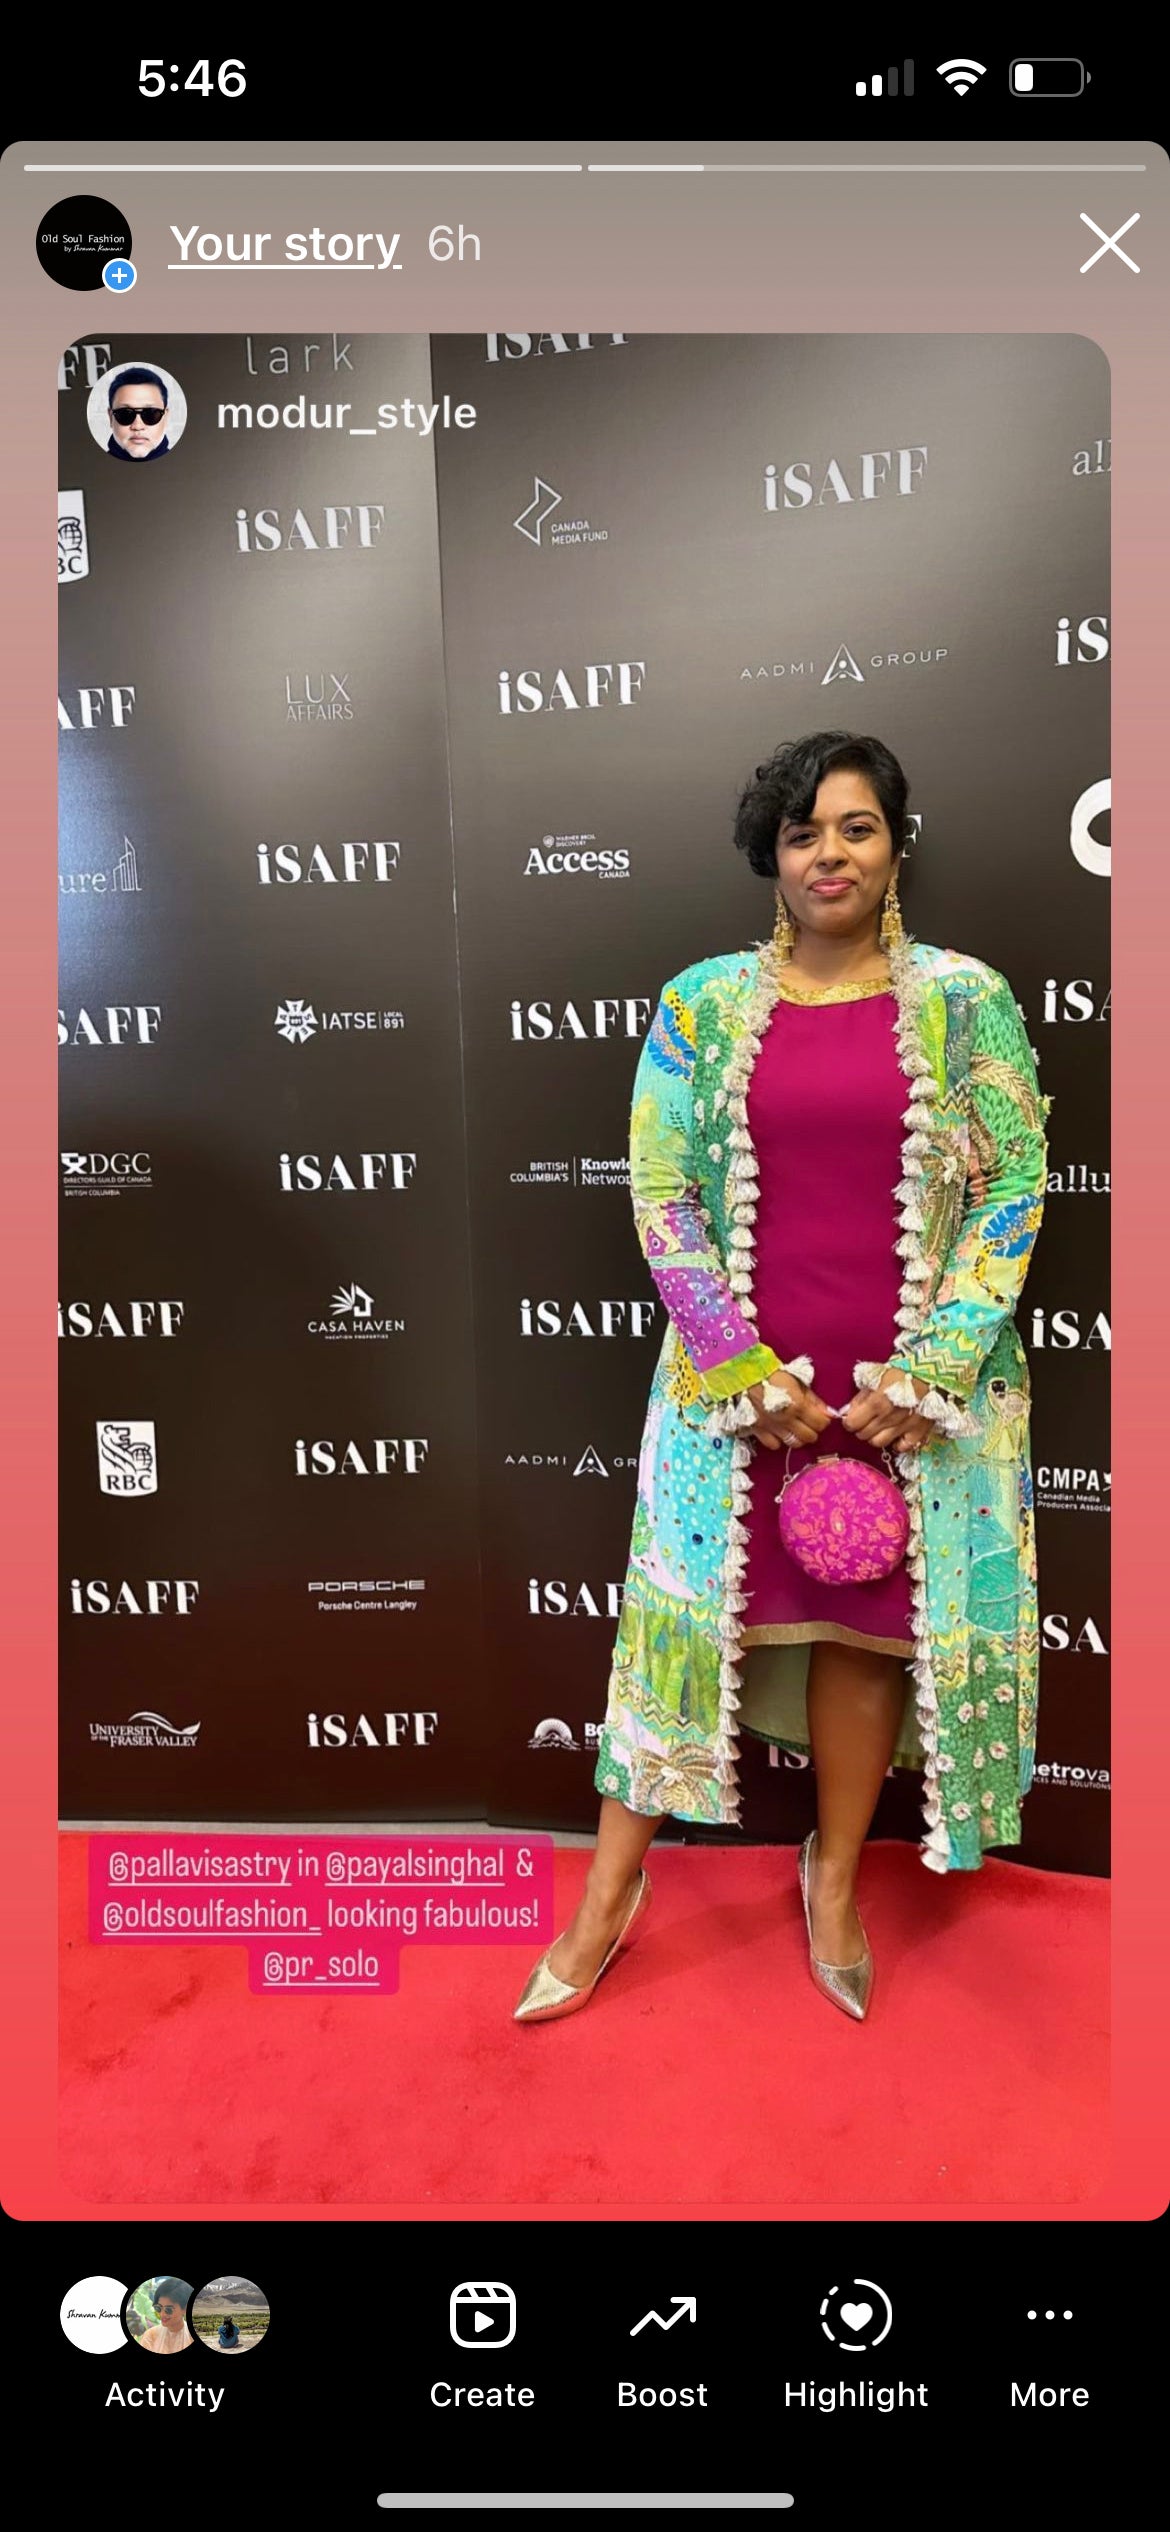 Pallavi Sastry at ISAFF in Canada holding a clutch from Old Soul Fashion